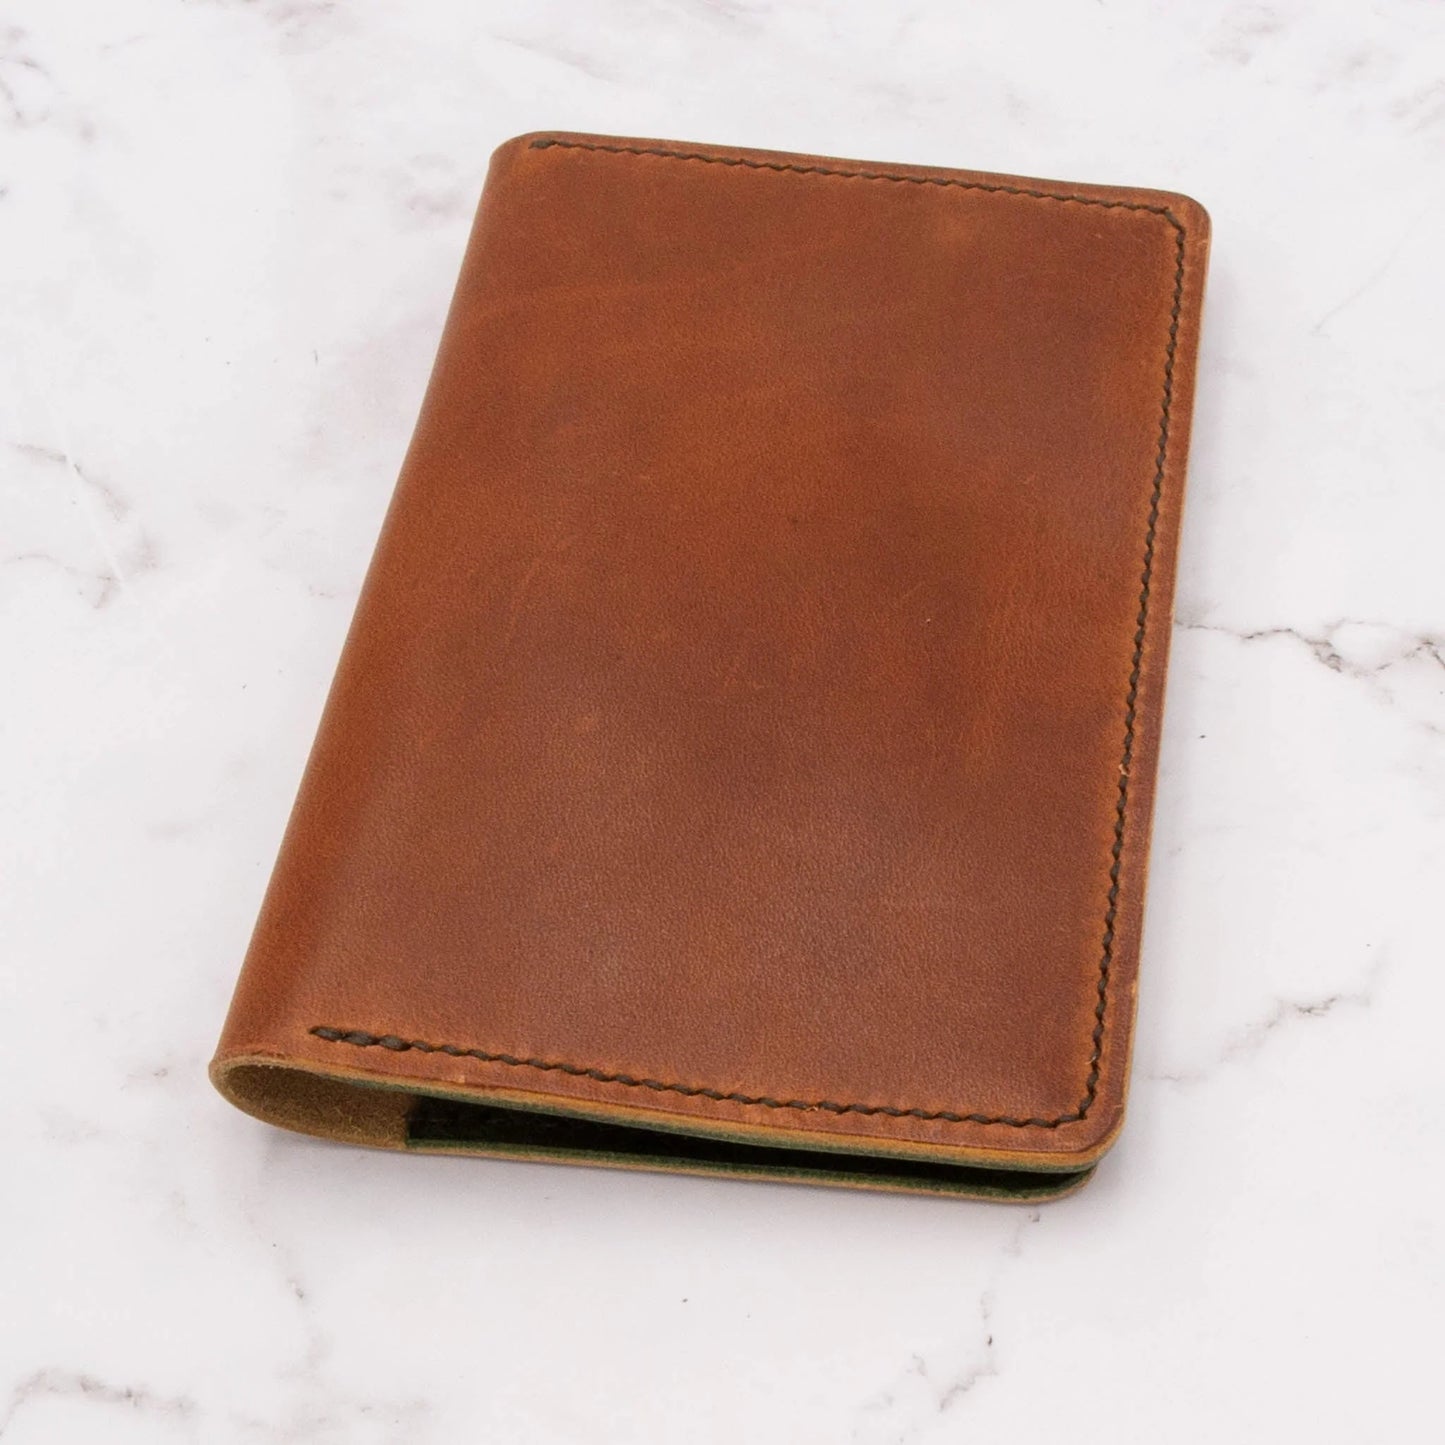 Arbor Trading Post Field Note Cover Handcrafted Leather Field Notes Cover - Two Tone (English Tan and Olive Green)